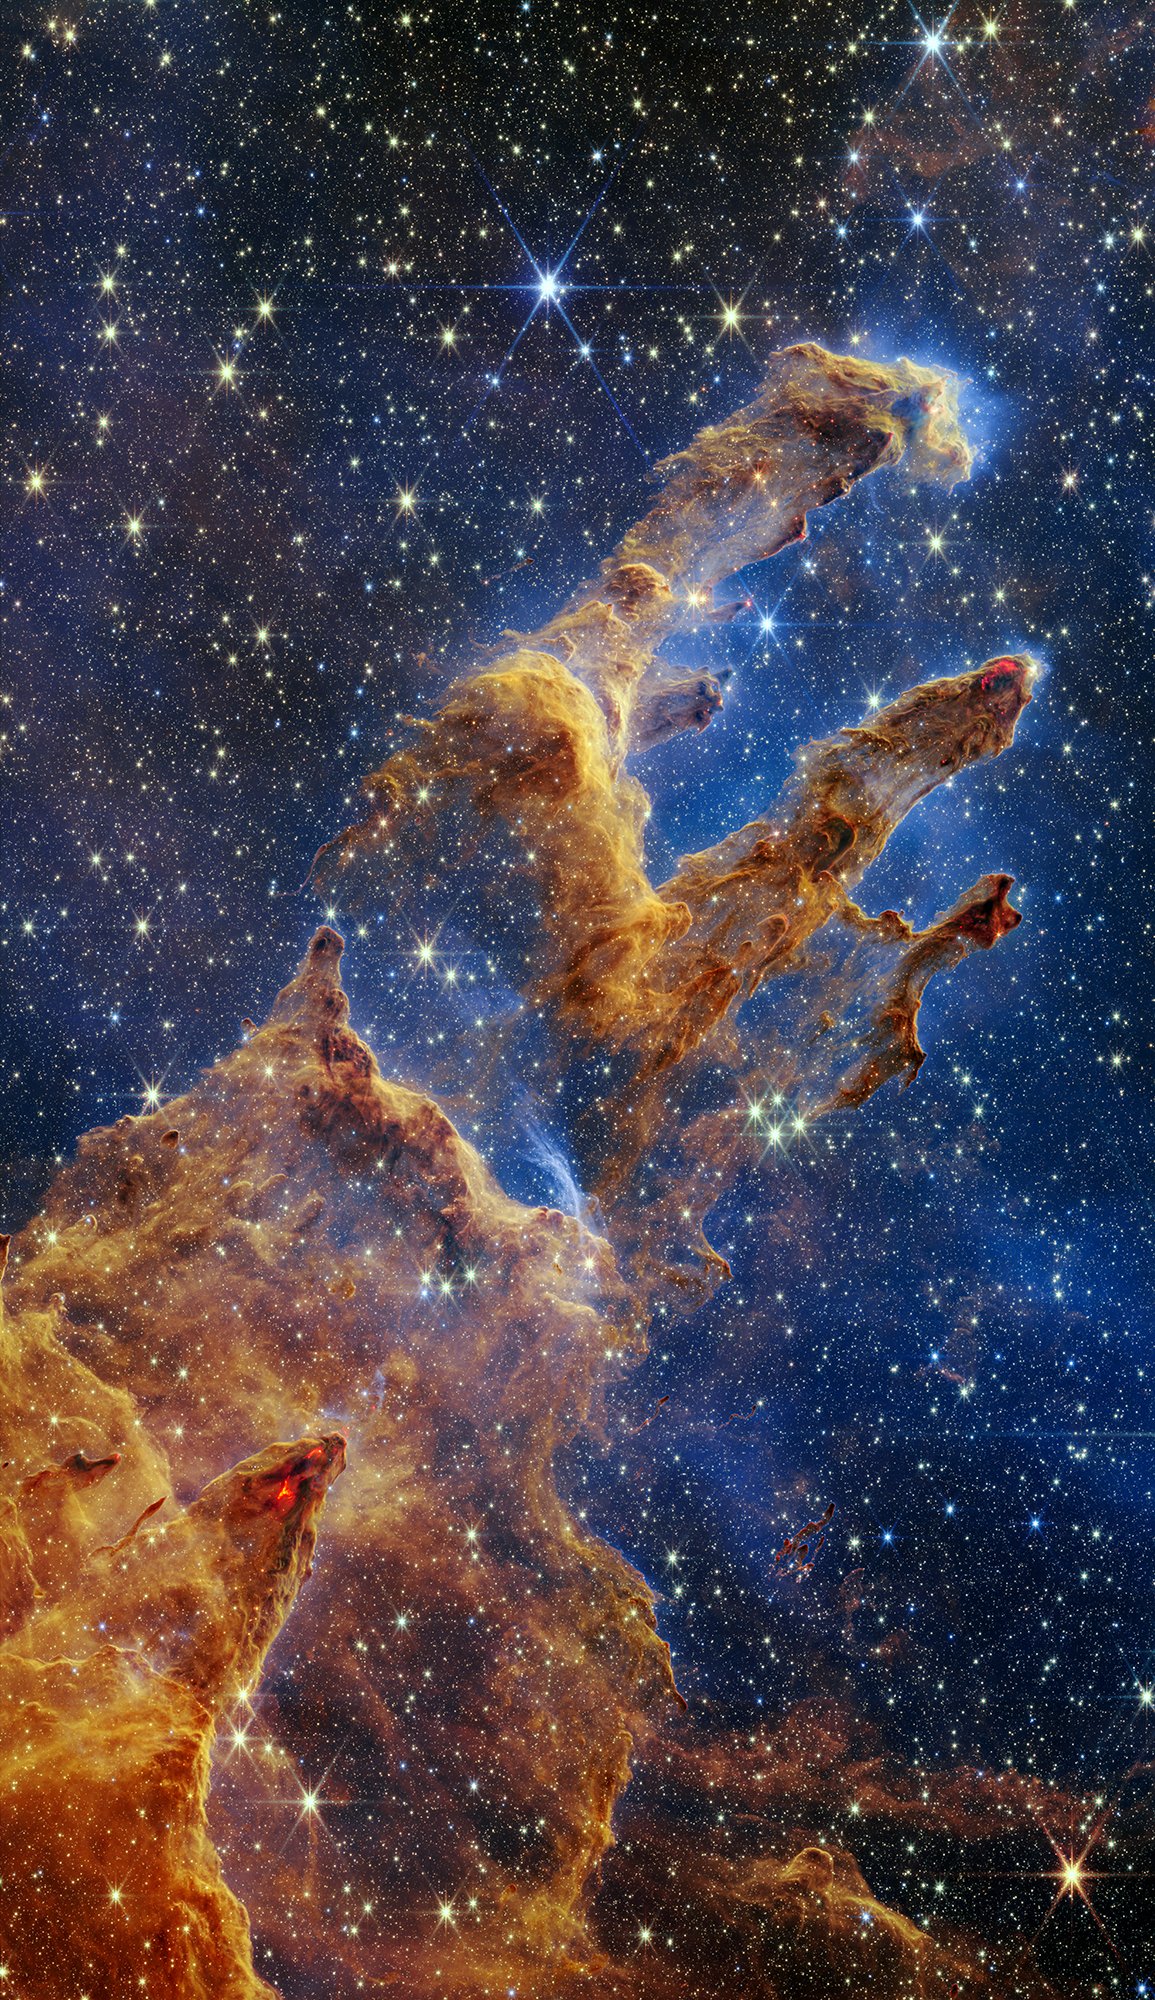 This Webb image of the “Pillars of Creation” has layers of semi-opaque, rusty red gas and dust that start at the bottom left and go toward the top right. There are three prominent pillars rising toward the top right. The left pillar is the largest and widest. The peaks of the second and third pillars are set off in darker shades of brown and have red outlines. Peeking through the layers of gas and dust is the background, set in shades of blue and littered with tiny yellow and blue stars. Many of the tips of the pillars appear tinged with what looks like lava. There are also tiny red dots at the edges of the pillars, which are newly born stars.